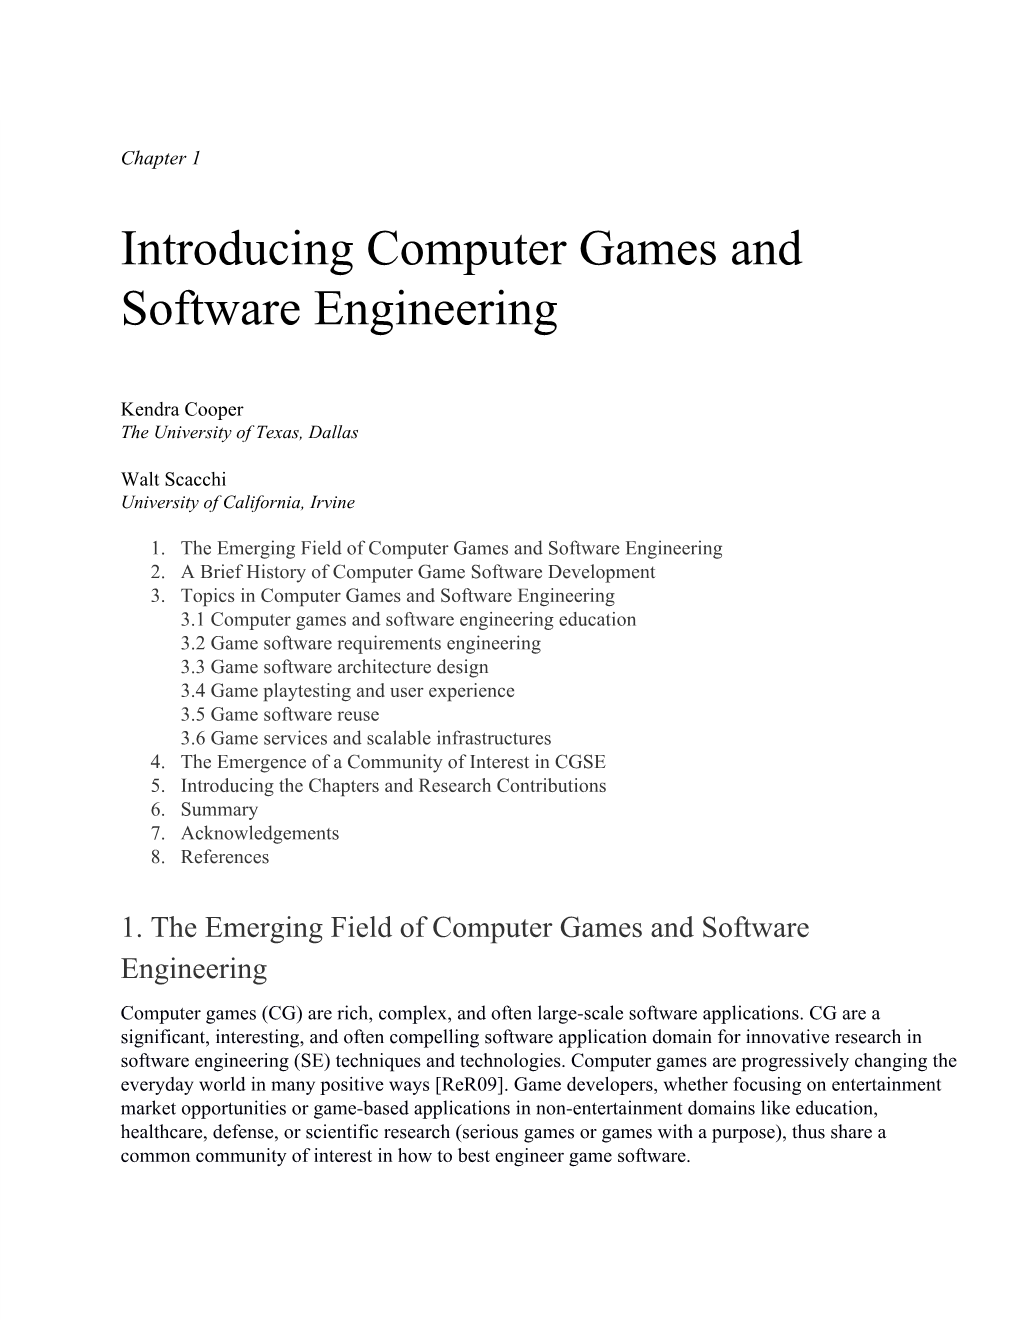 Introducing Computer Games and Software Engineering